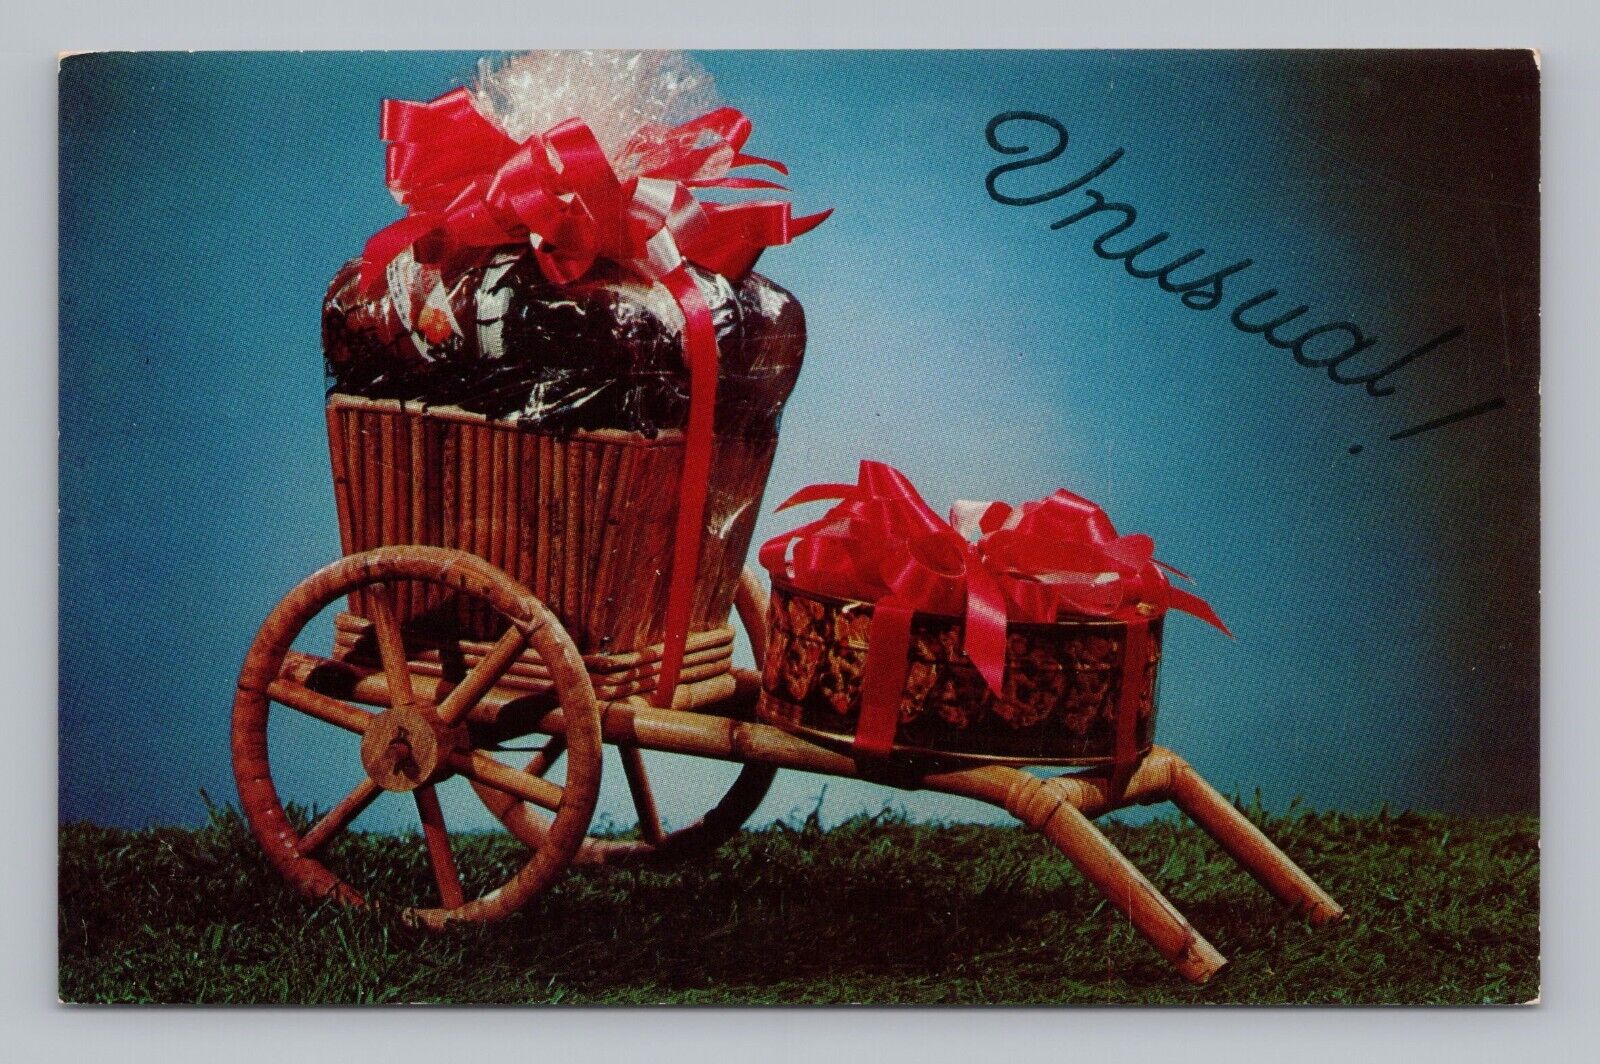 Postcard Advertising Sale of Unusual Food Baskets for Holiday Gift Giving